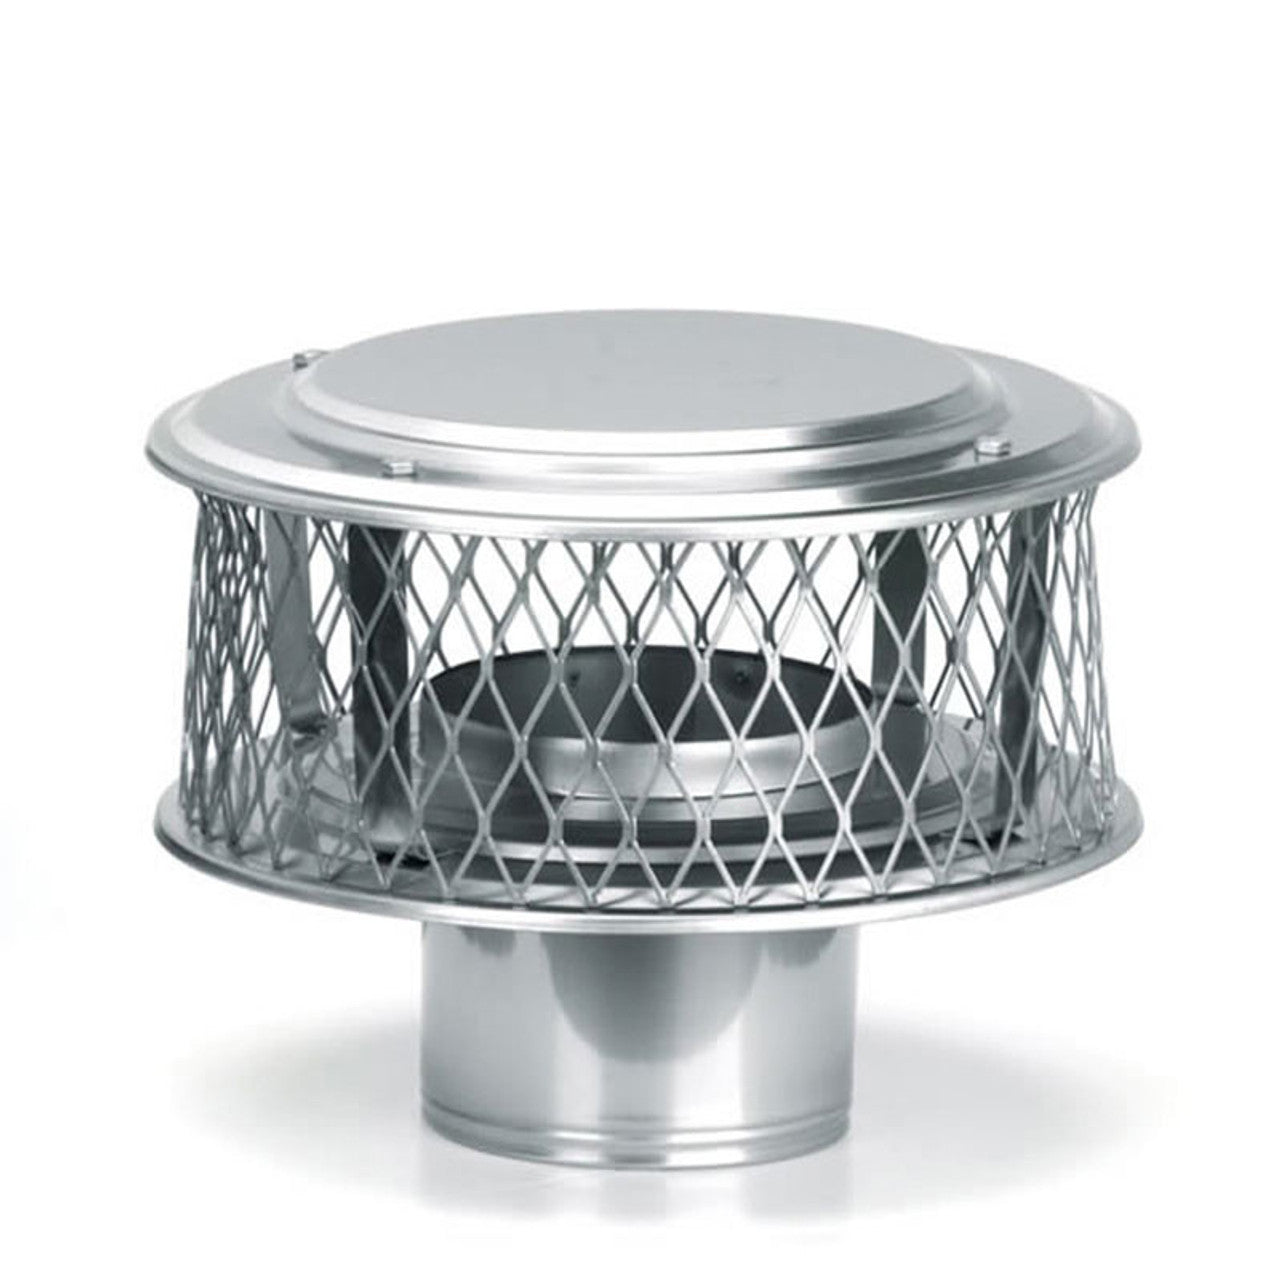 11" HomeSaver 304-Alloy Stainless Steel Guardian Cap with 5/8" Mesh - Chimney Cricket